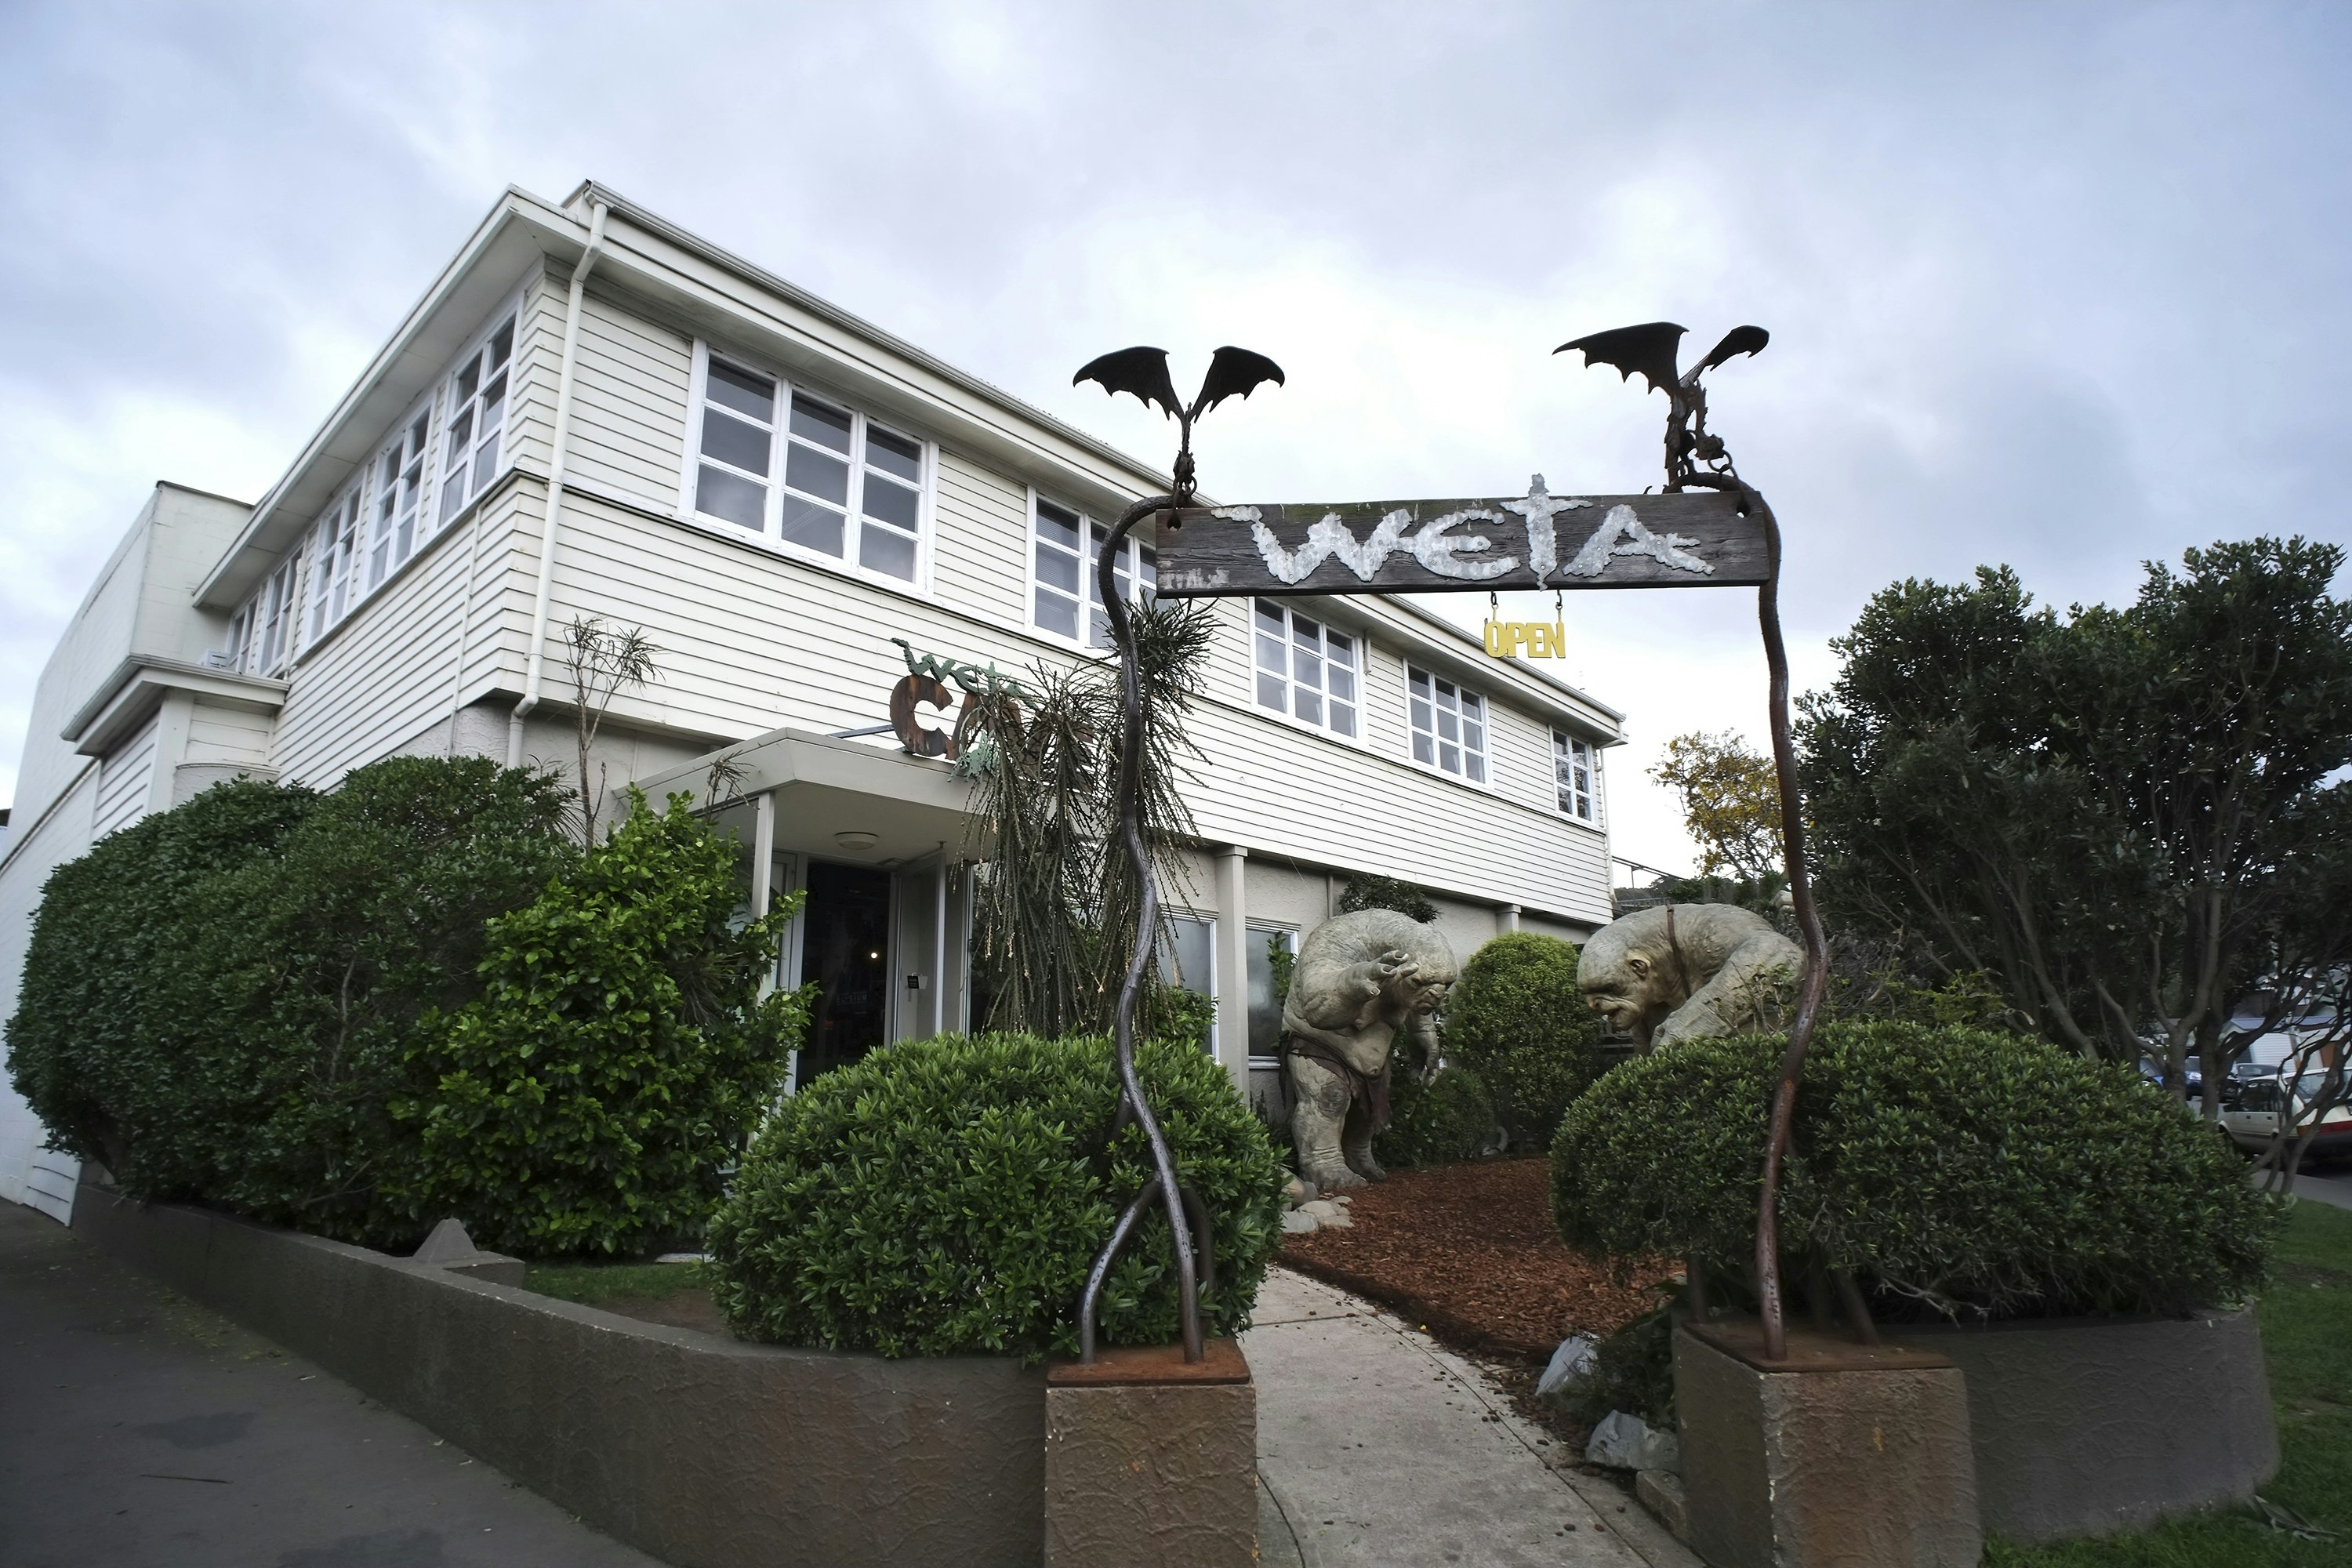 Wellington, New Zealand - August 27, 2013: Front Entrance at Weta Cave; Shutterstock ID 306493316; Your name (First / Last): Lauren Gillmore; GL account no.: 56530; Netsuite department name: Online-Design; Full Product or Project name including edition: 65050/ Online Design /LaurenGillmore/POI